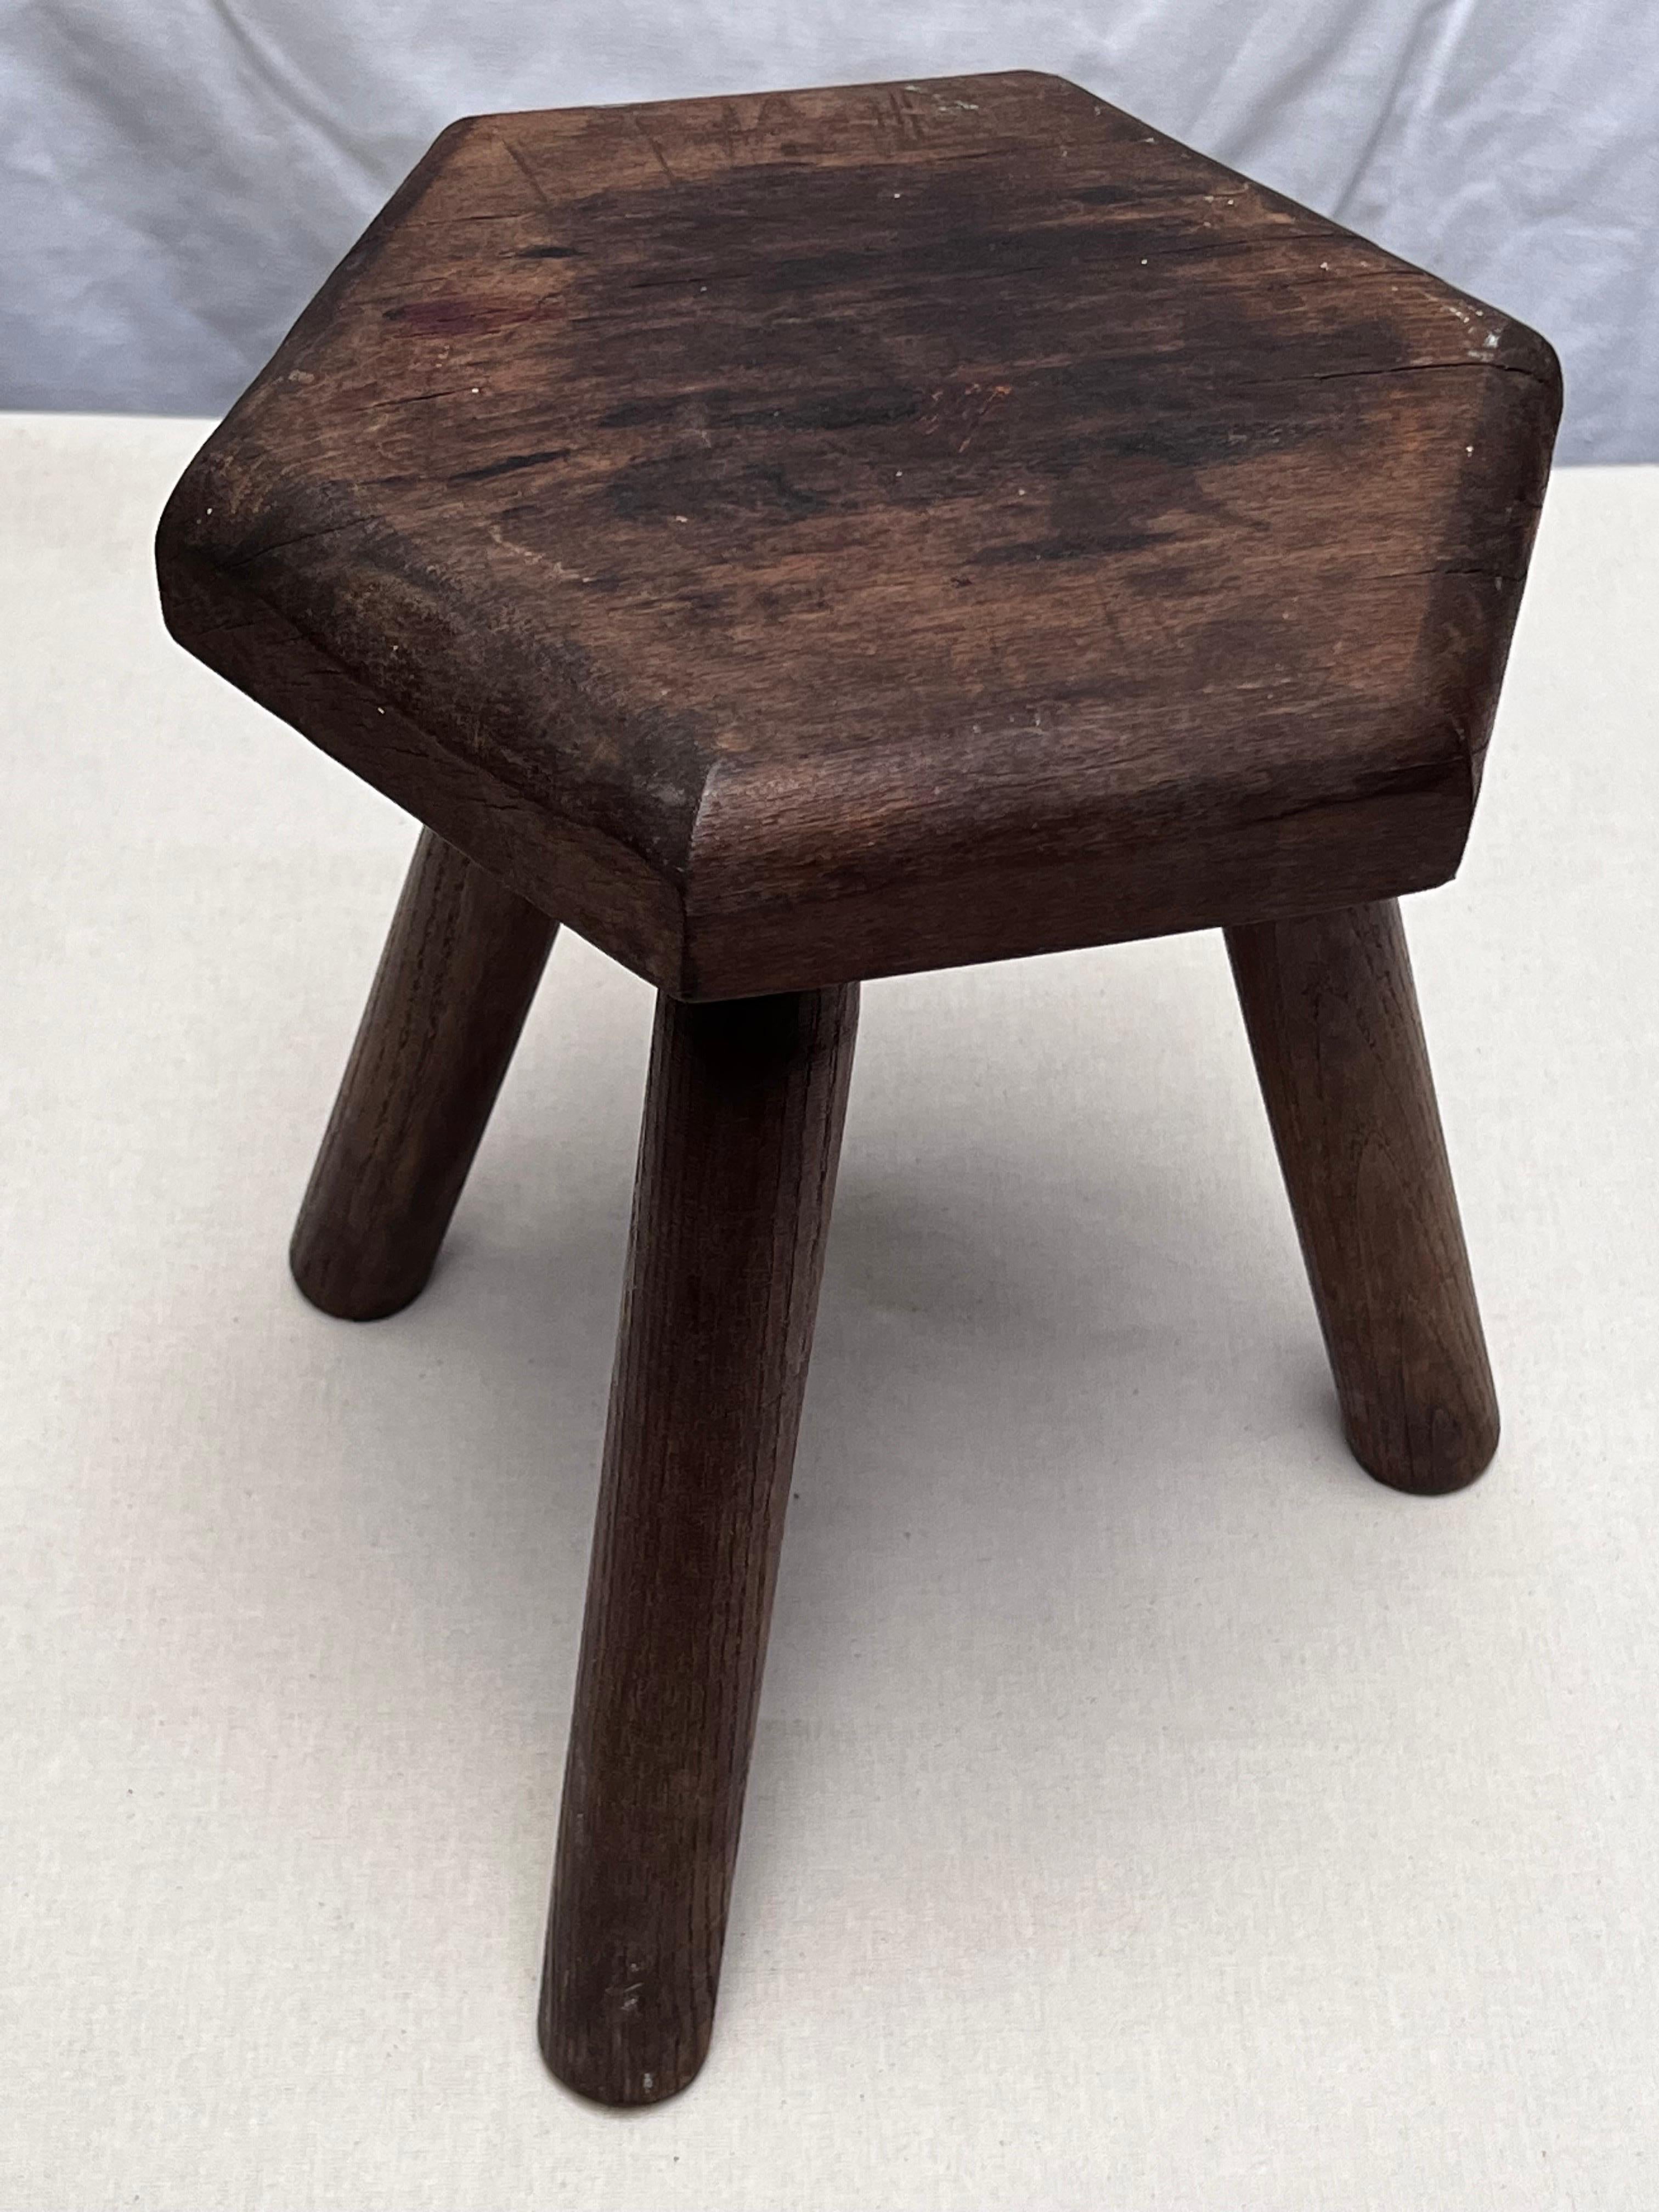 20th Century French Stained Wooden Stool circa 1940 Brutalist Decorative elements